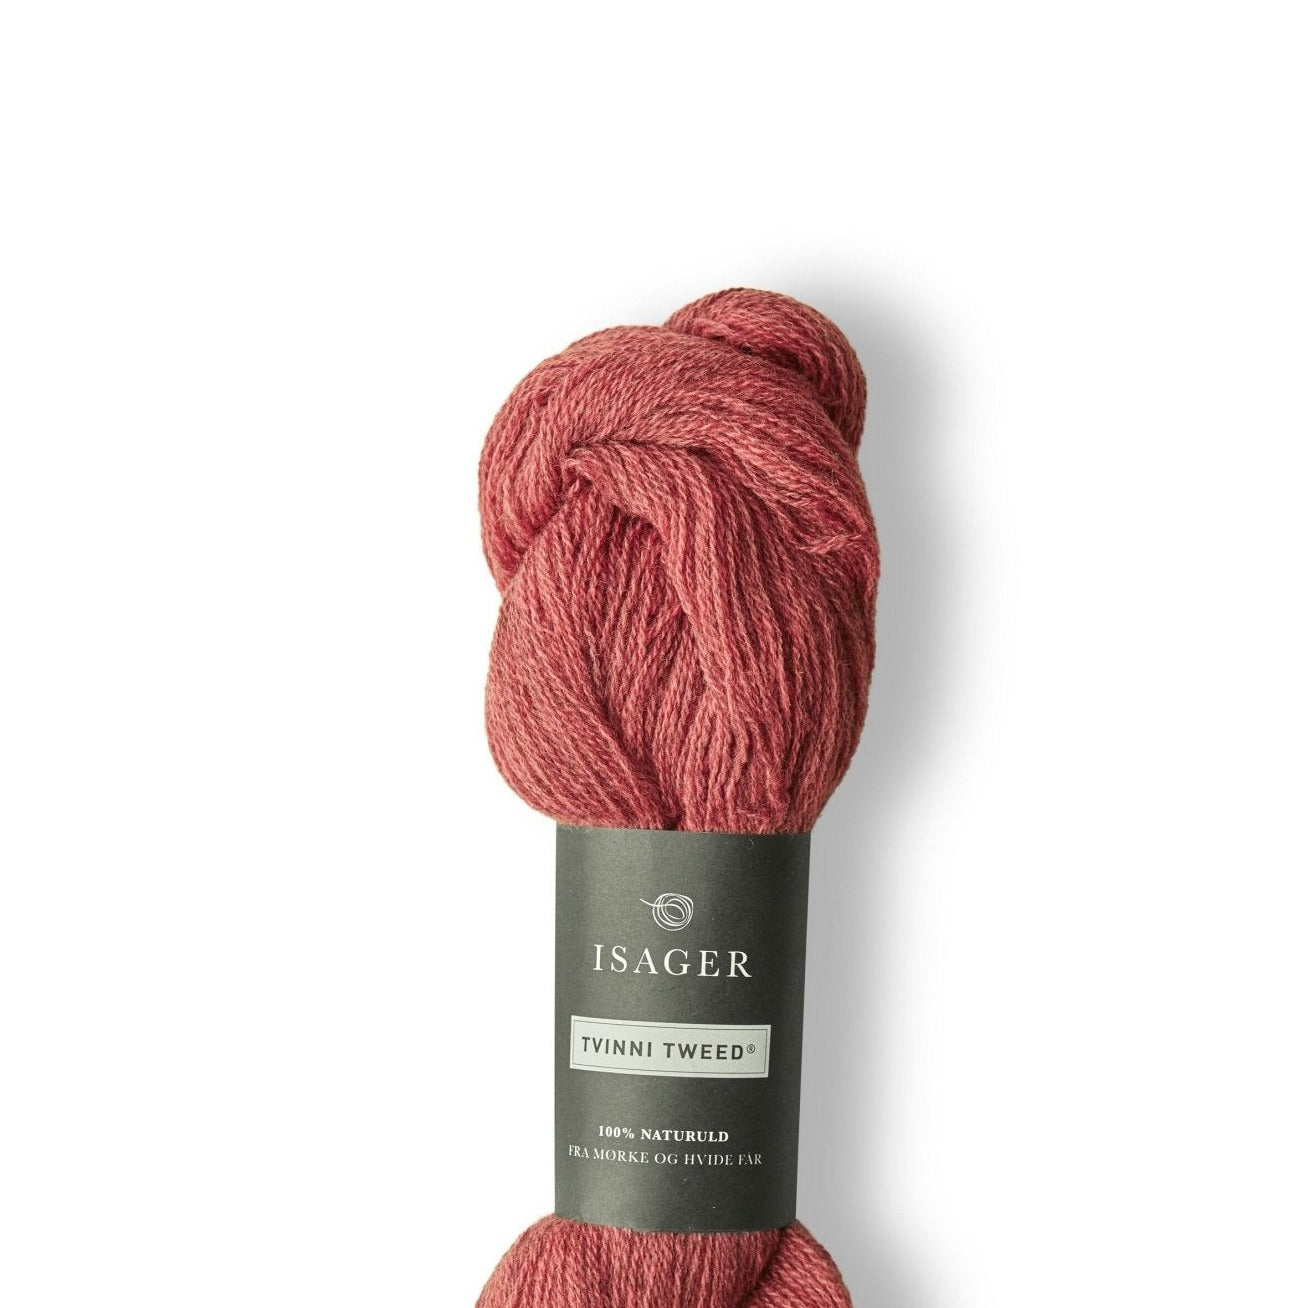 Isager Tvinni - 19s - 4 Ply - Isager - The Little Yarn Store